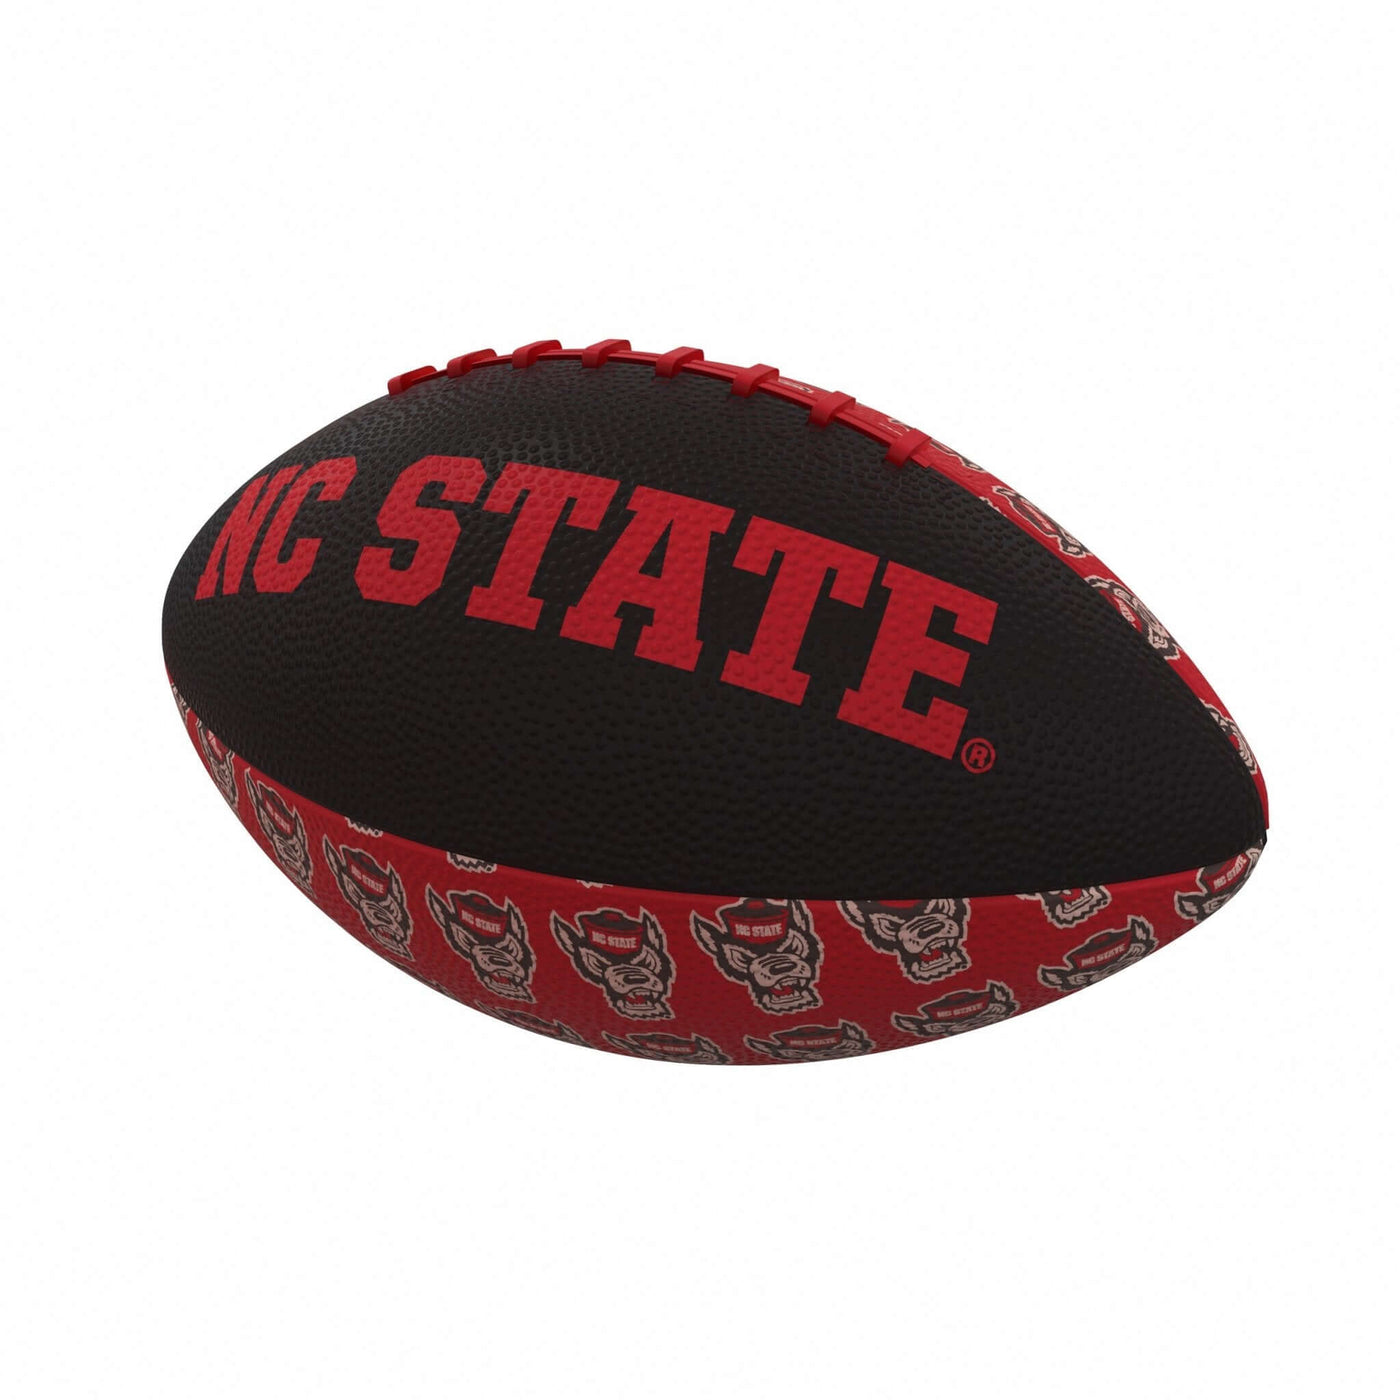 NC State Repeating Mini-Size Rubber Football - Logo Brands